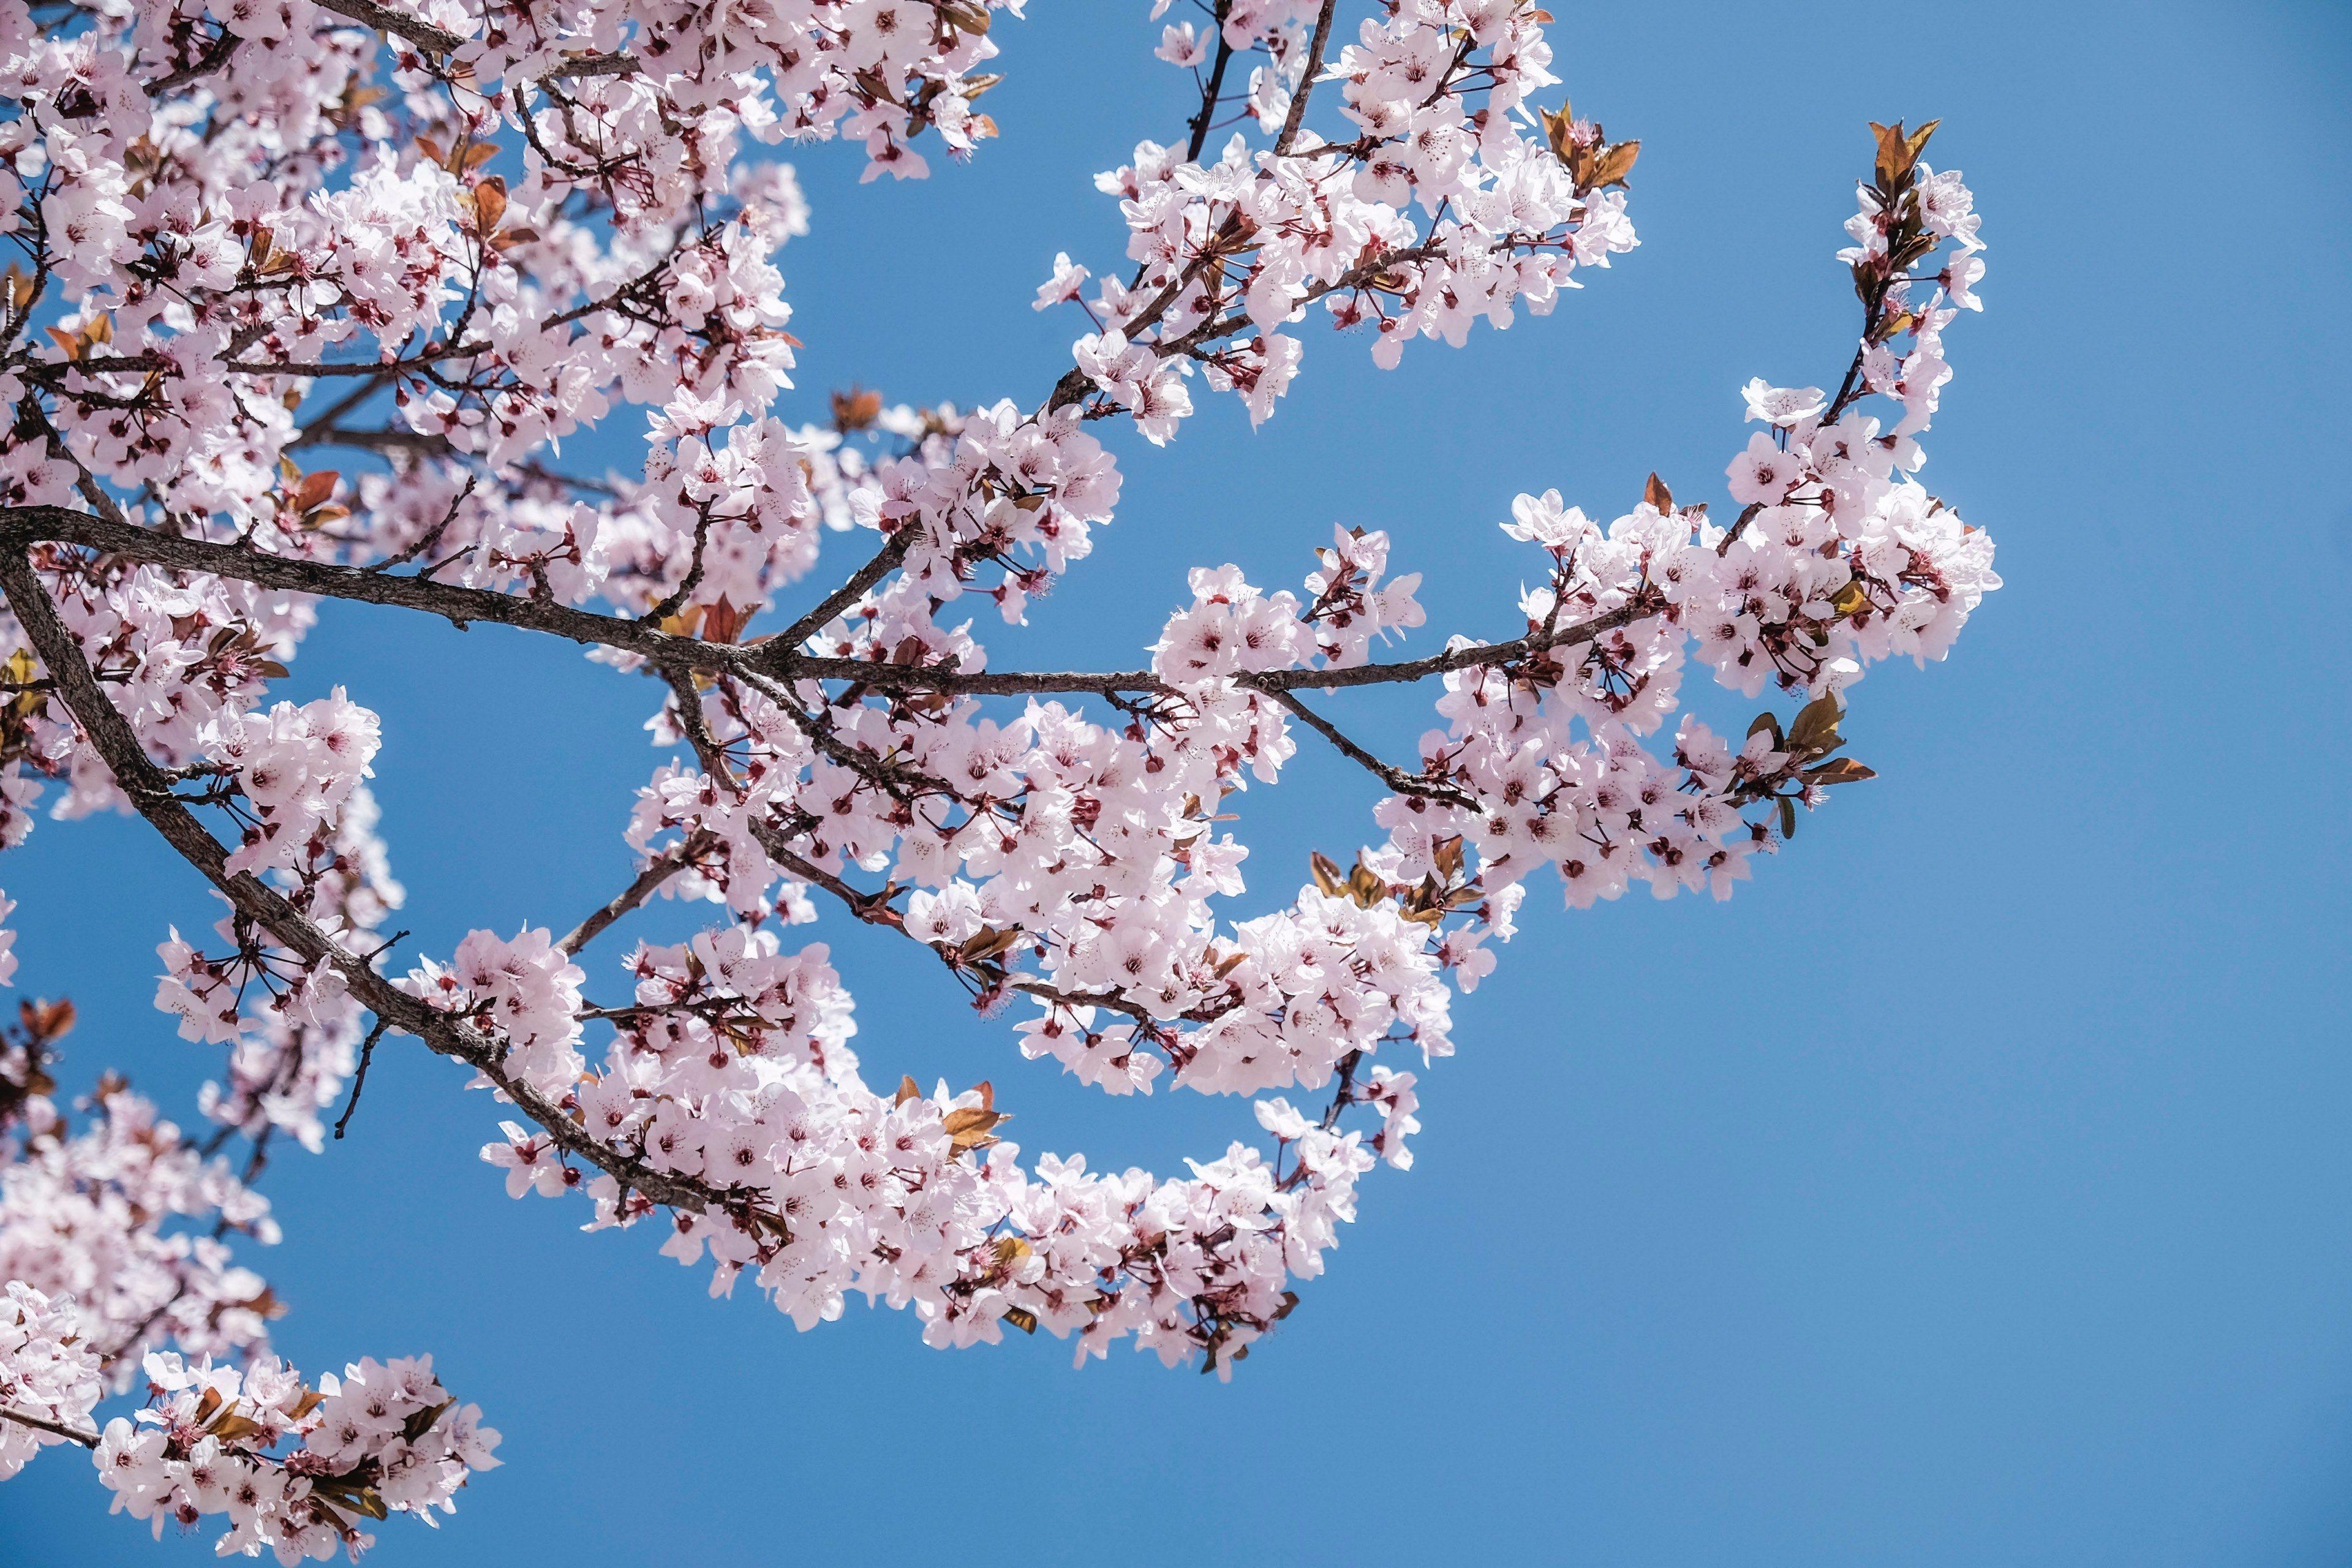 4K Cherry Blossom Wallpapers - Top Free 4K Cherry Blossom Backgrounds